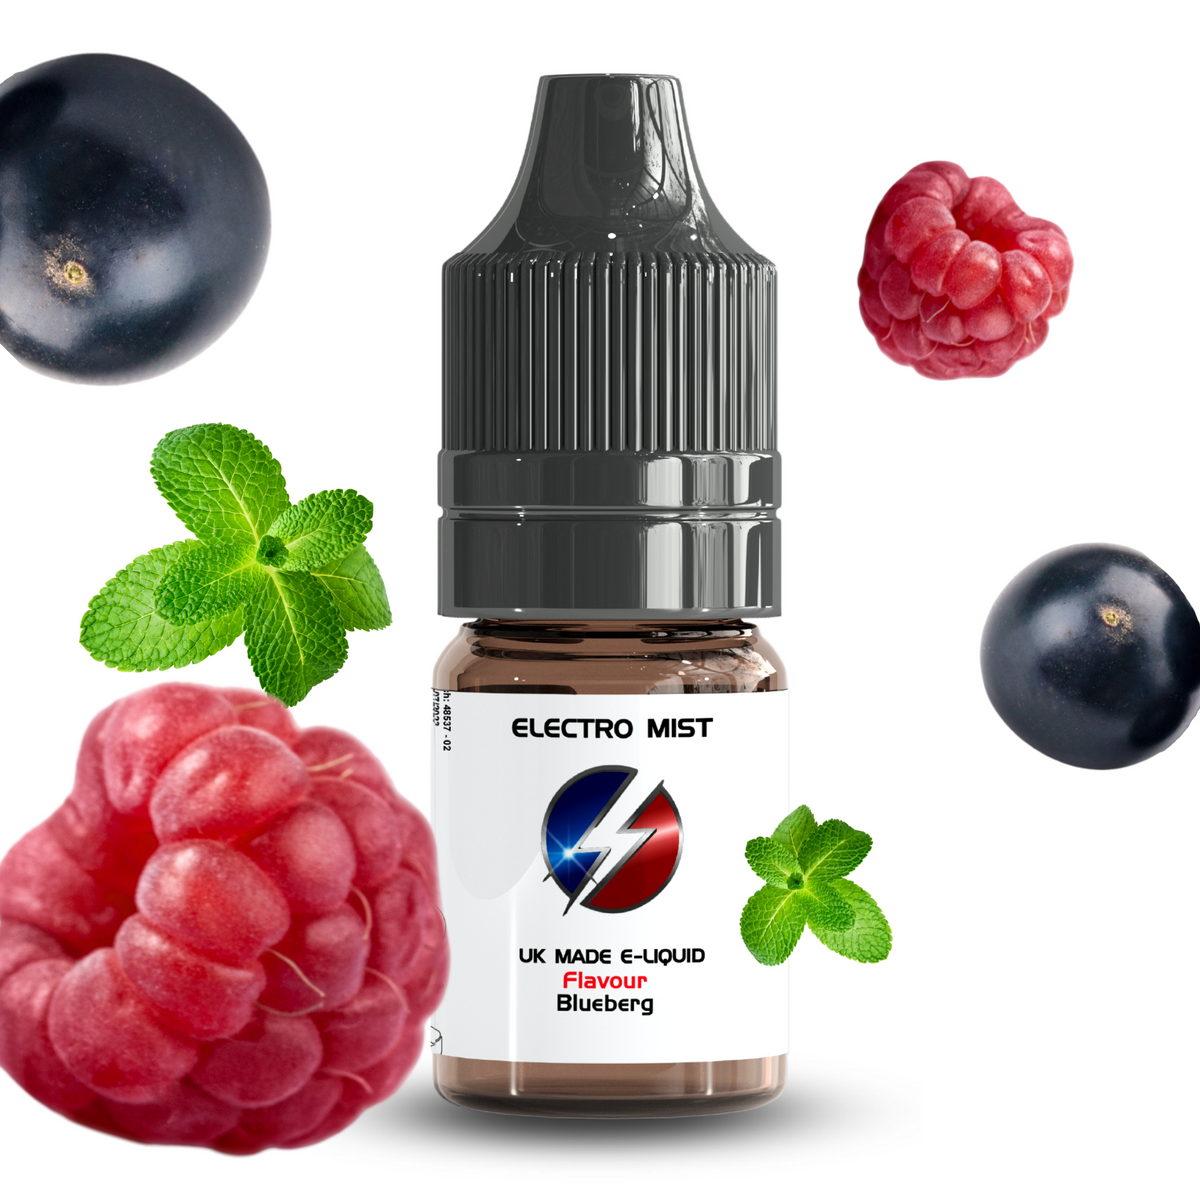 Electromist, the e-liquid brand you can trust. Get your taste buds ready for a flavour sensation, Blueberg. Nicotine Content: 3mg/6mg/12mg. Products may contain nicotine. For over 18s Only ejuice, vape pen, eliquid, e cigarette, 10ml, vaping, cloud, PG, VG, 60/40, vape liquid, Flavour